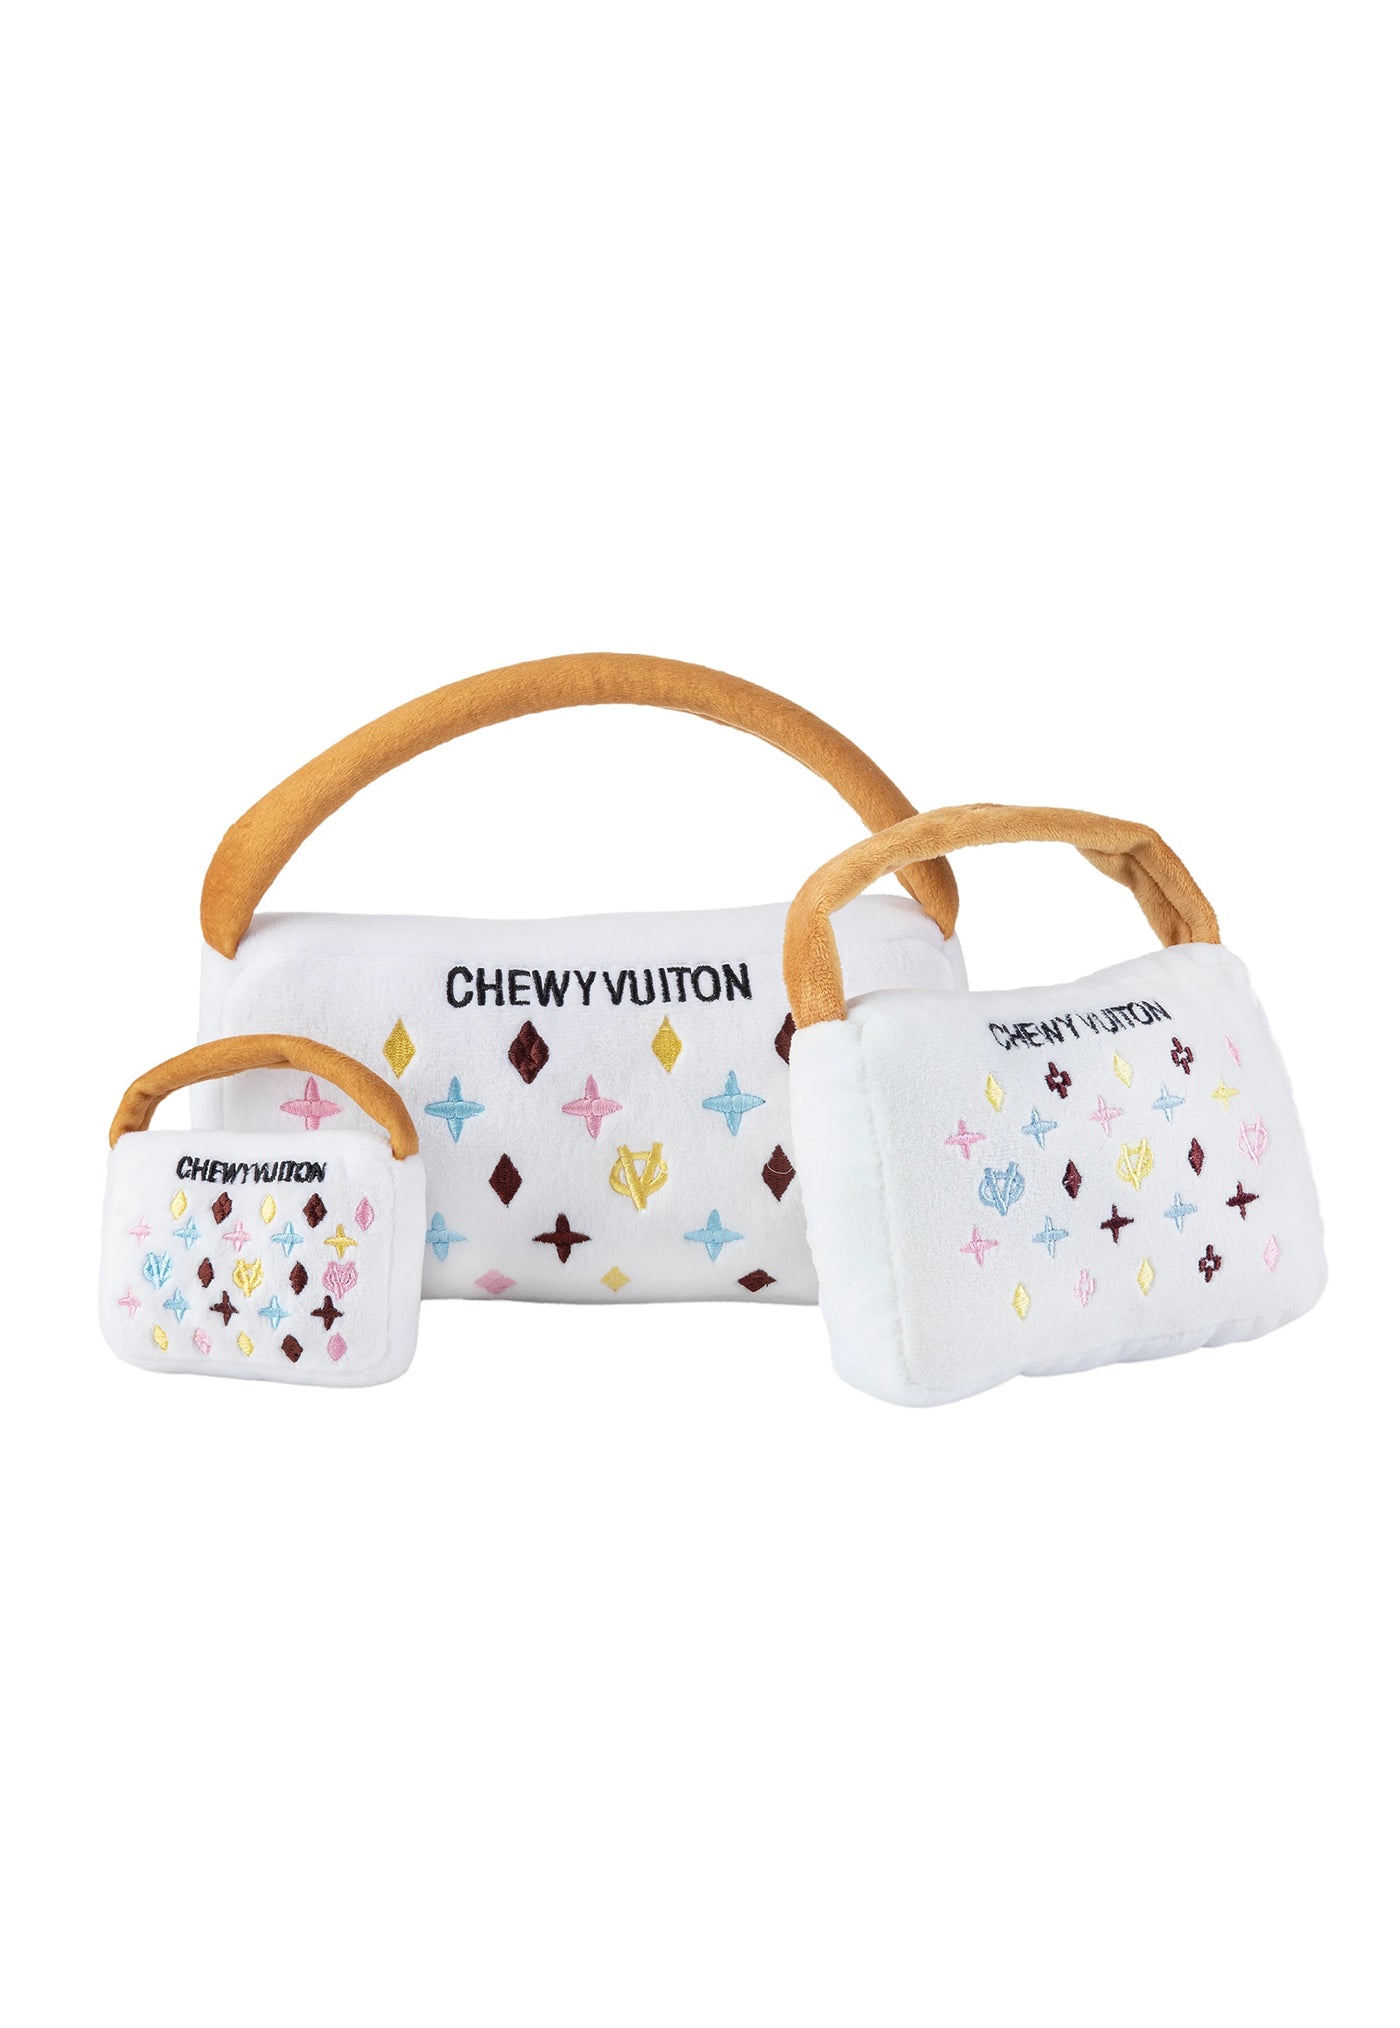 Chewy Vuiton Handbag - White sold by Angel Divine